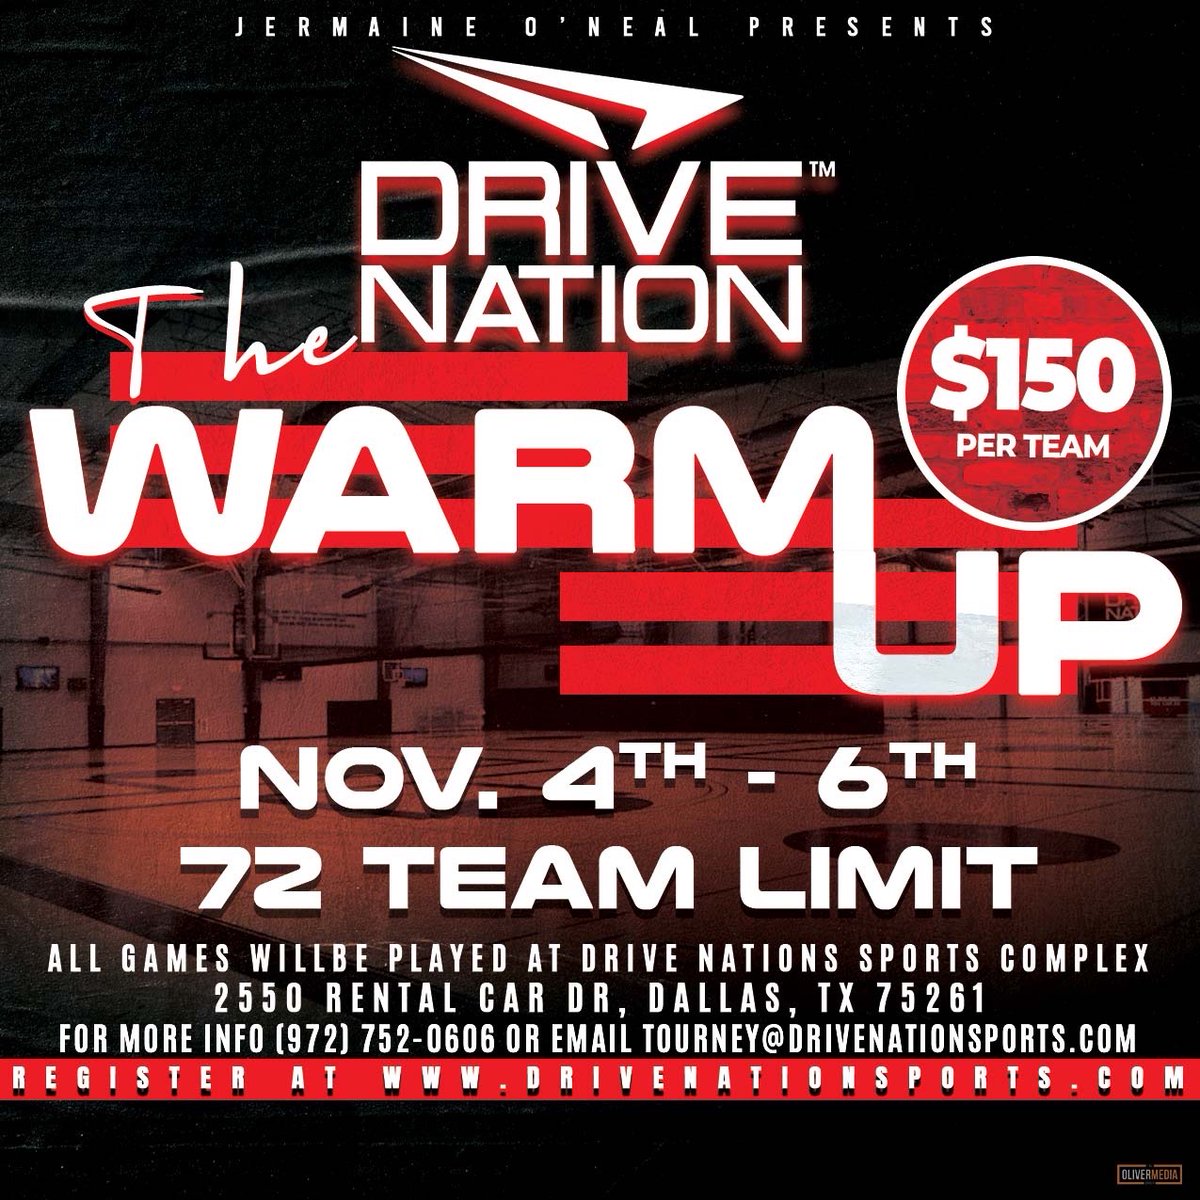 The Warm-Up is coming this November. For more Info contact (972) 752-0606 or tourney@drivenationsports.com REGISTER TODAY at drivenationsports.com/upcoming-tourn… #DriveNationBasketball #DFWtournaments #warmup